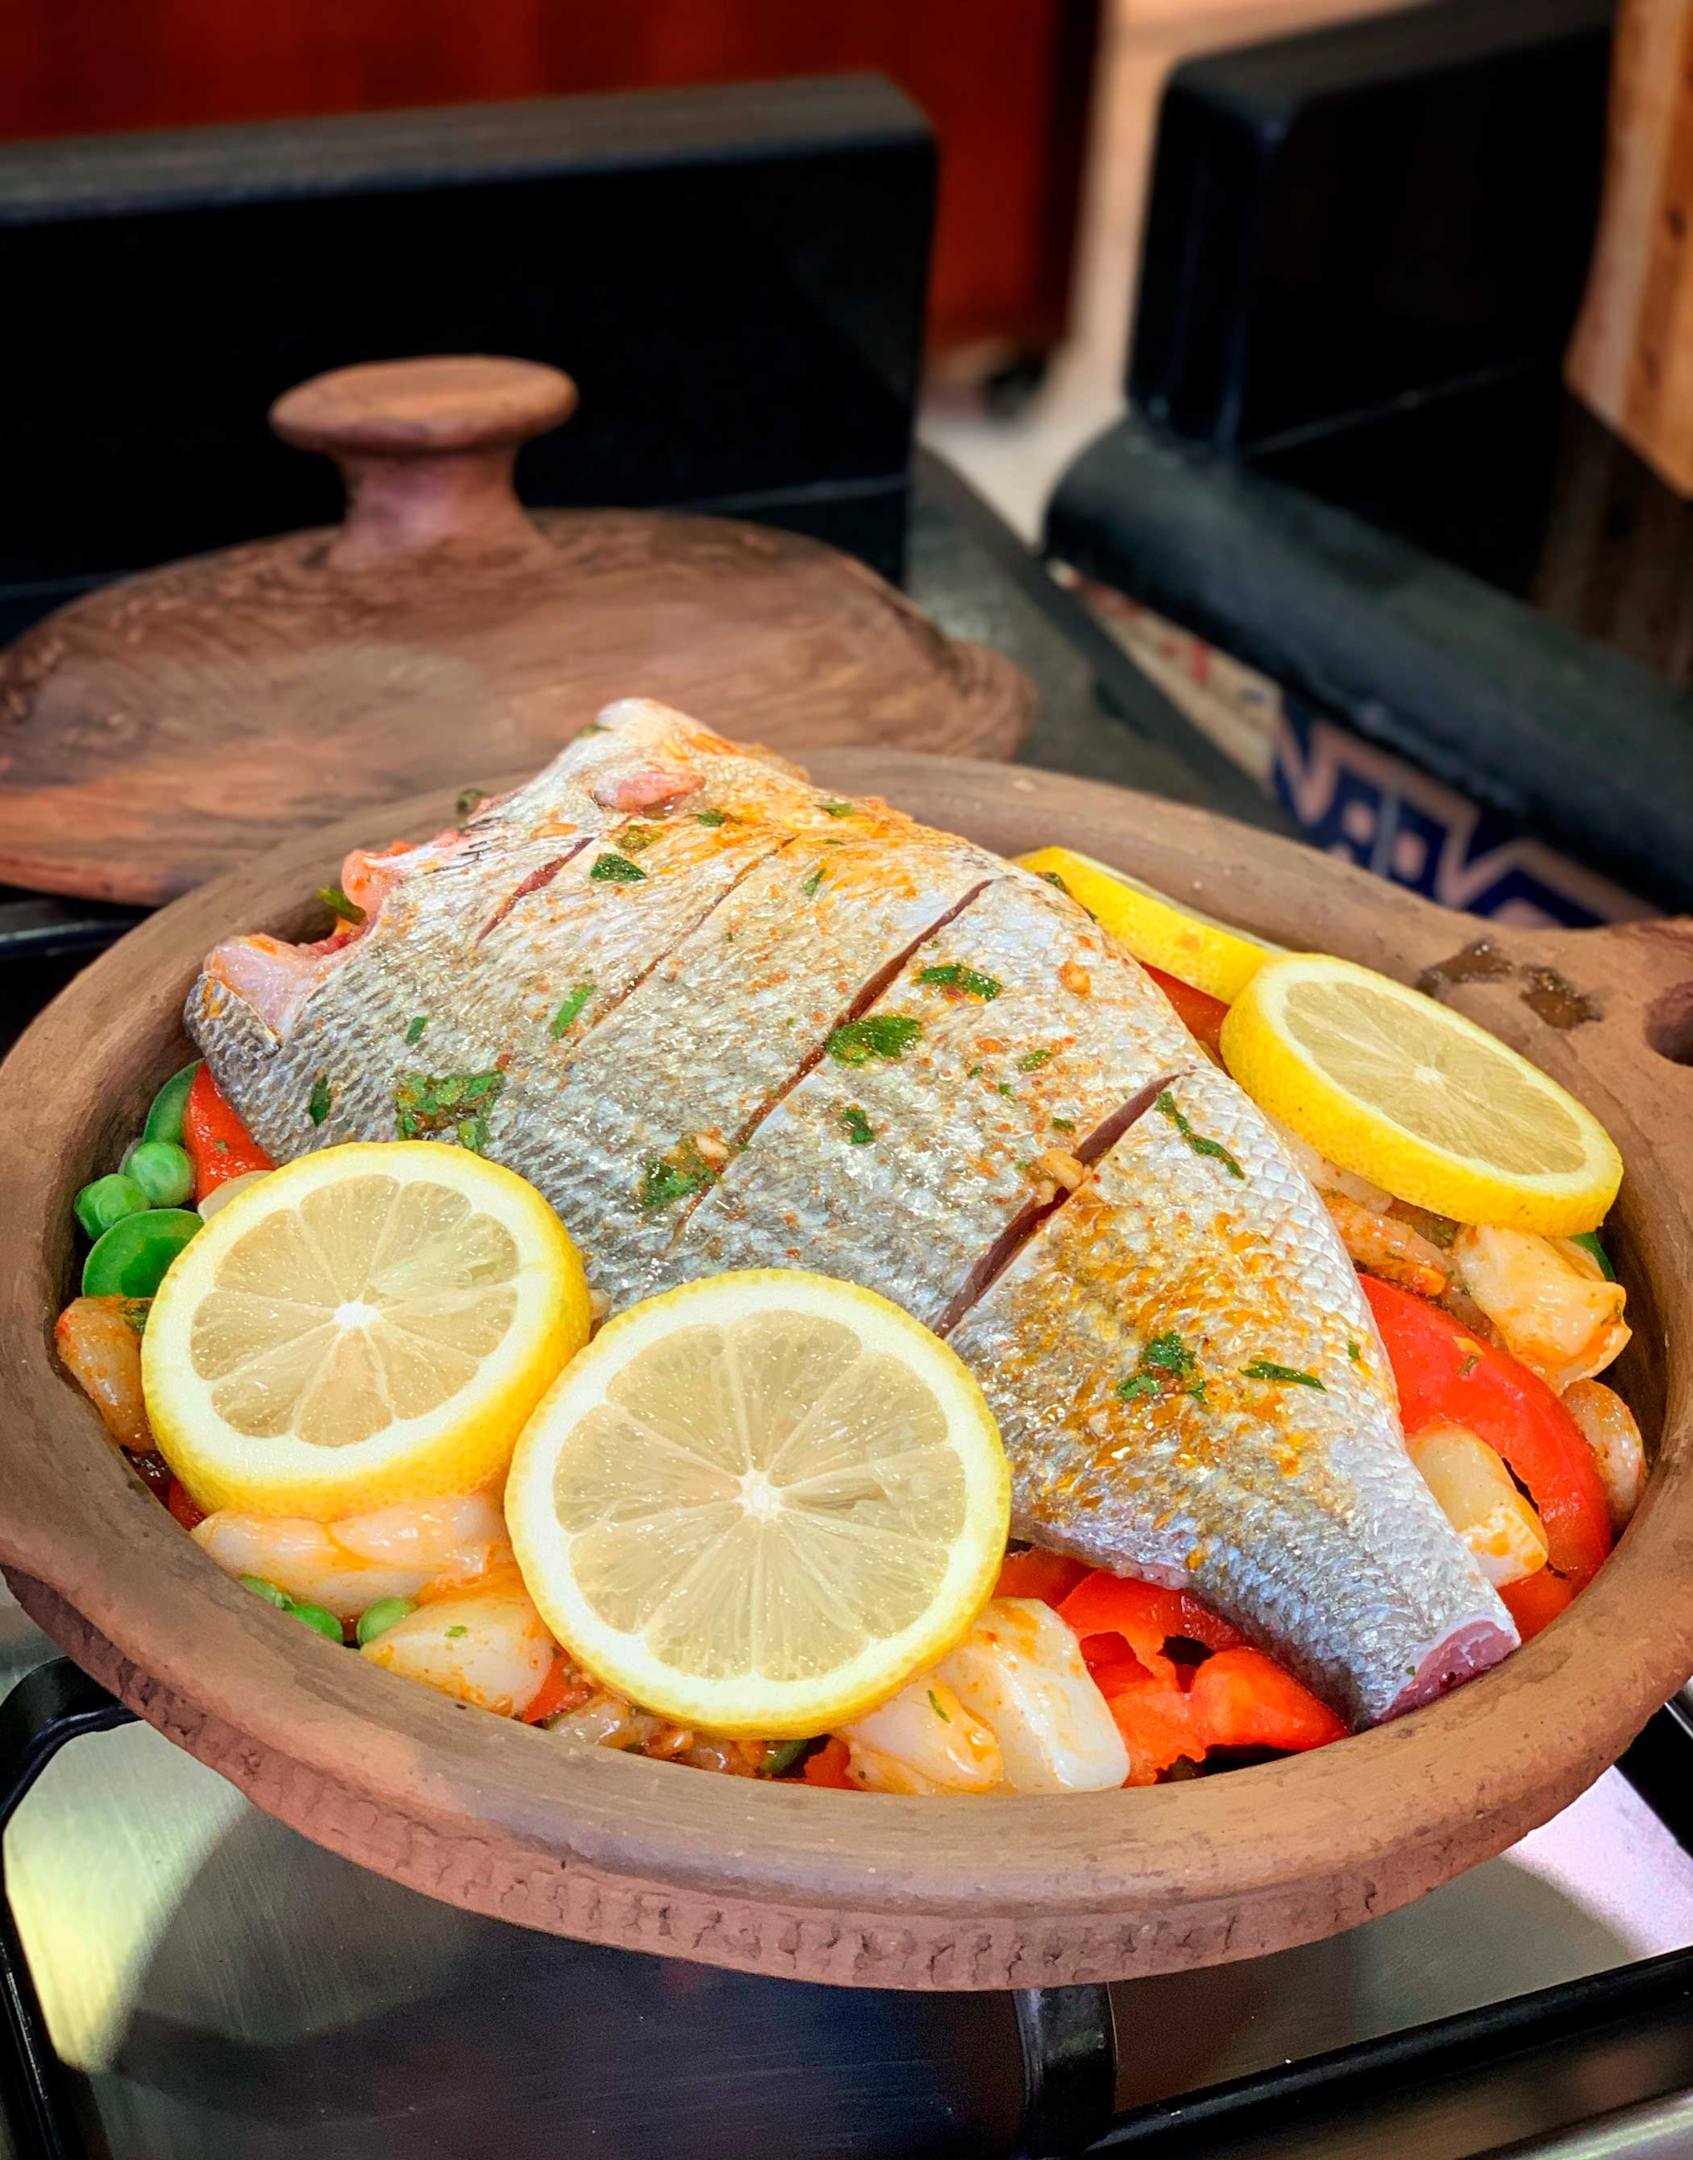 In Morocco fish is normally marinated in chermoula before being cooked.